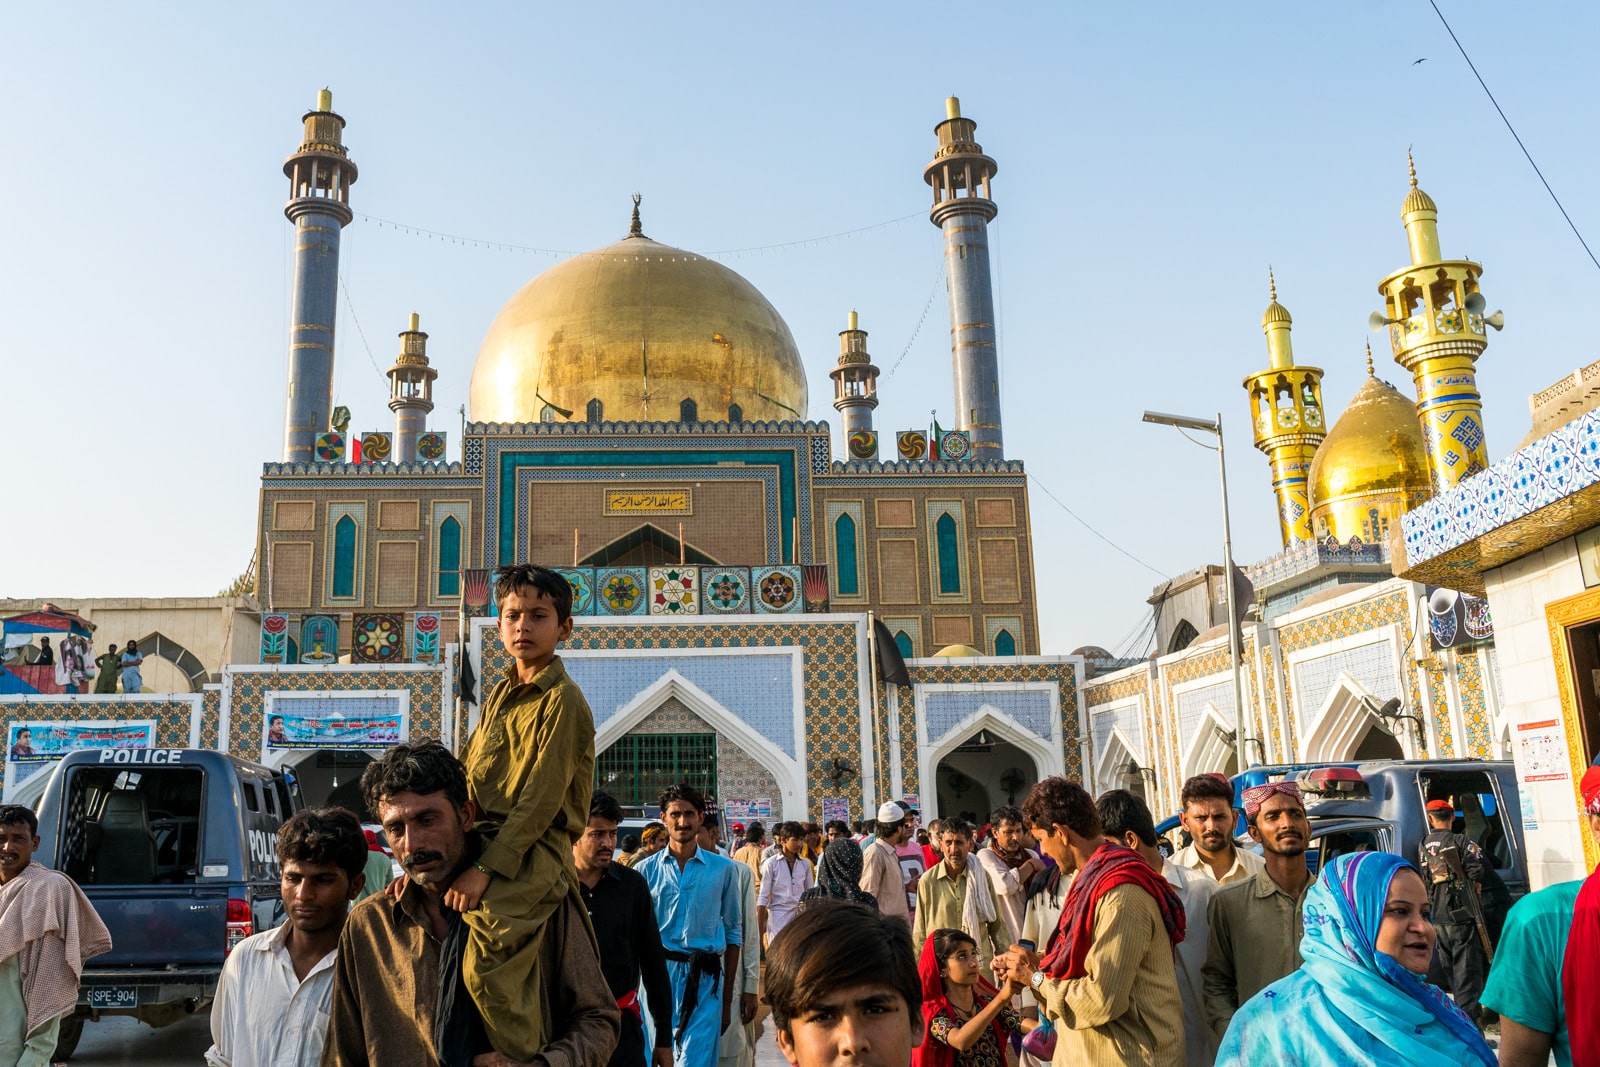 Sindh travel guide - Urs crowds at the shrine of Lal Shahbaz Qalandar in Sehwan Sharif, Pakistan - Lost With Purpose travel blog